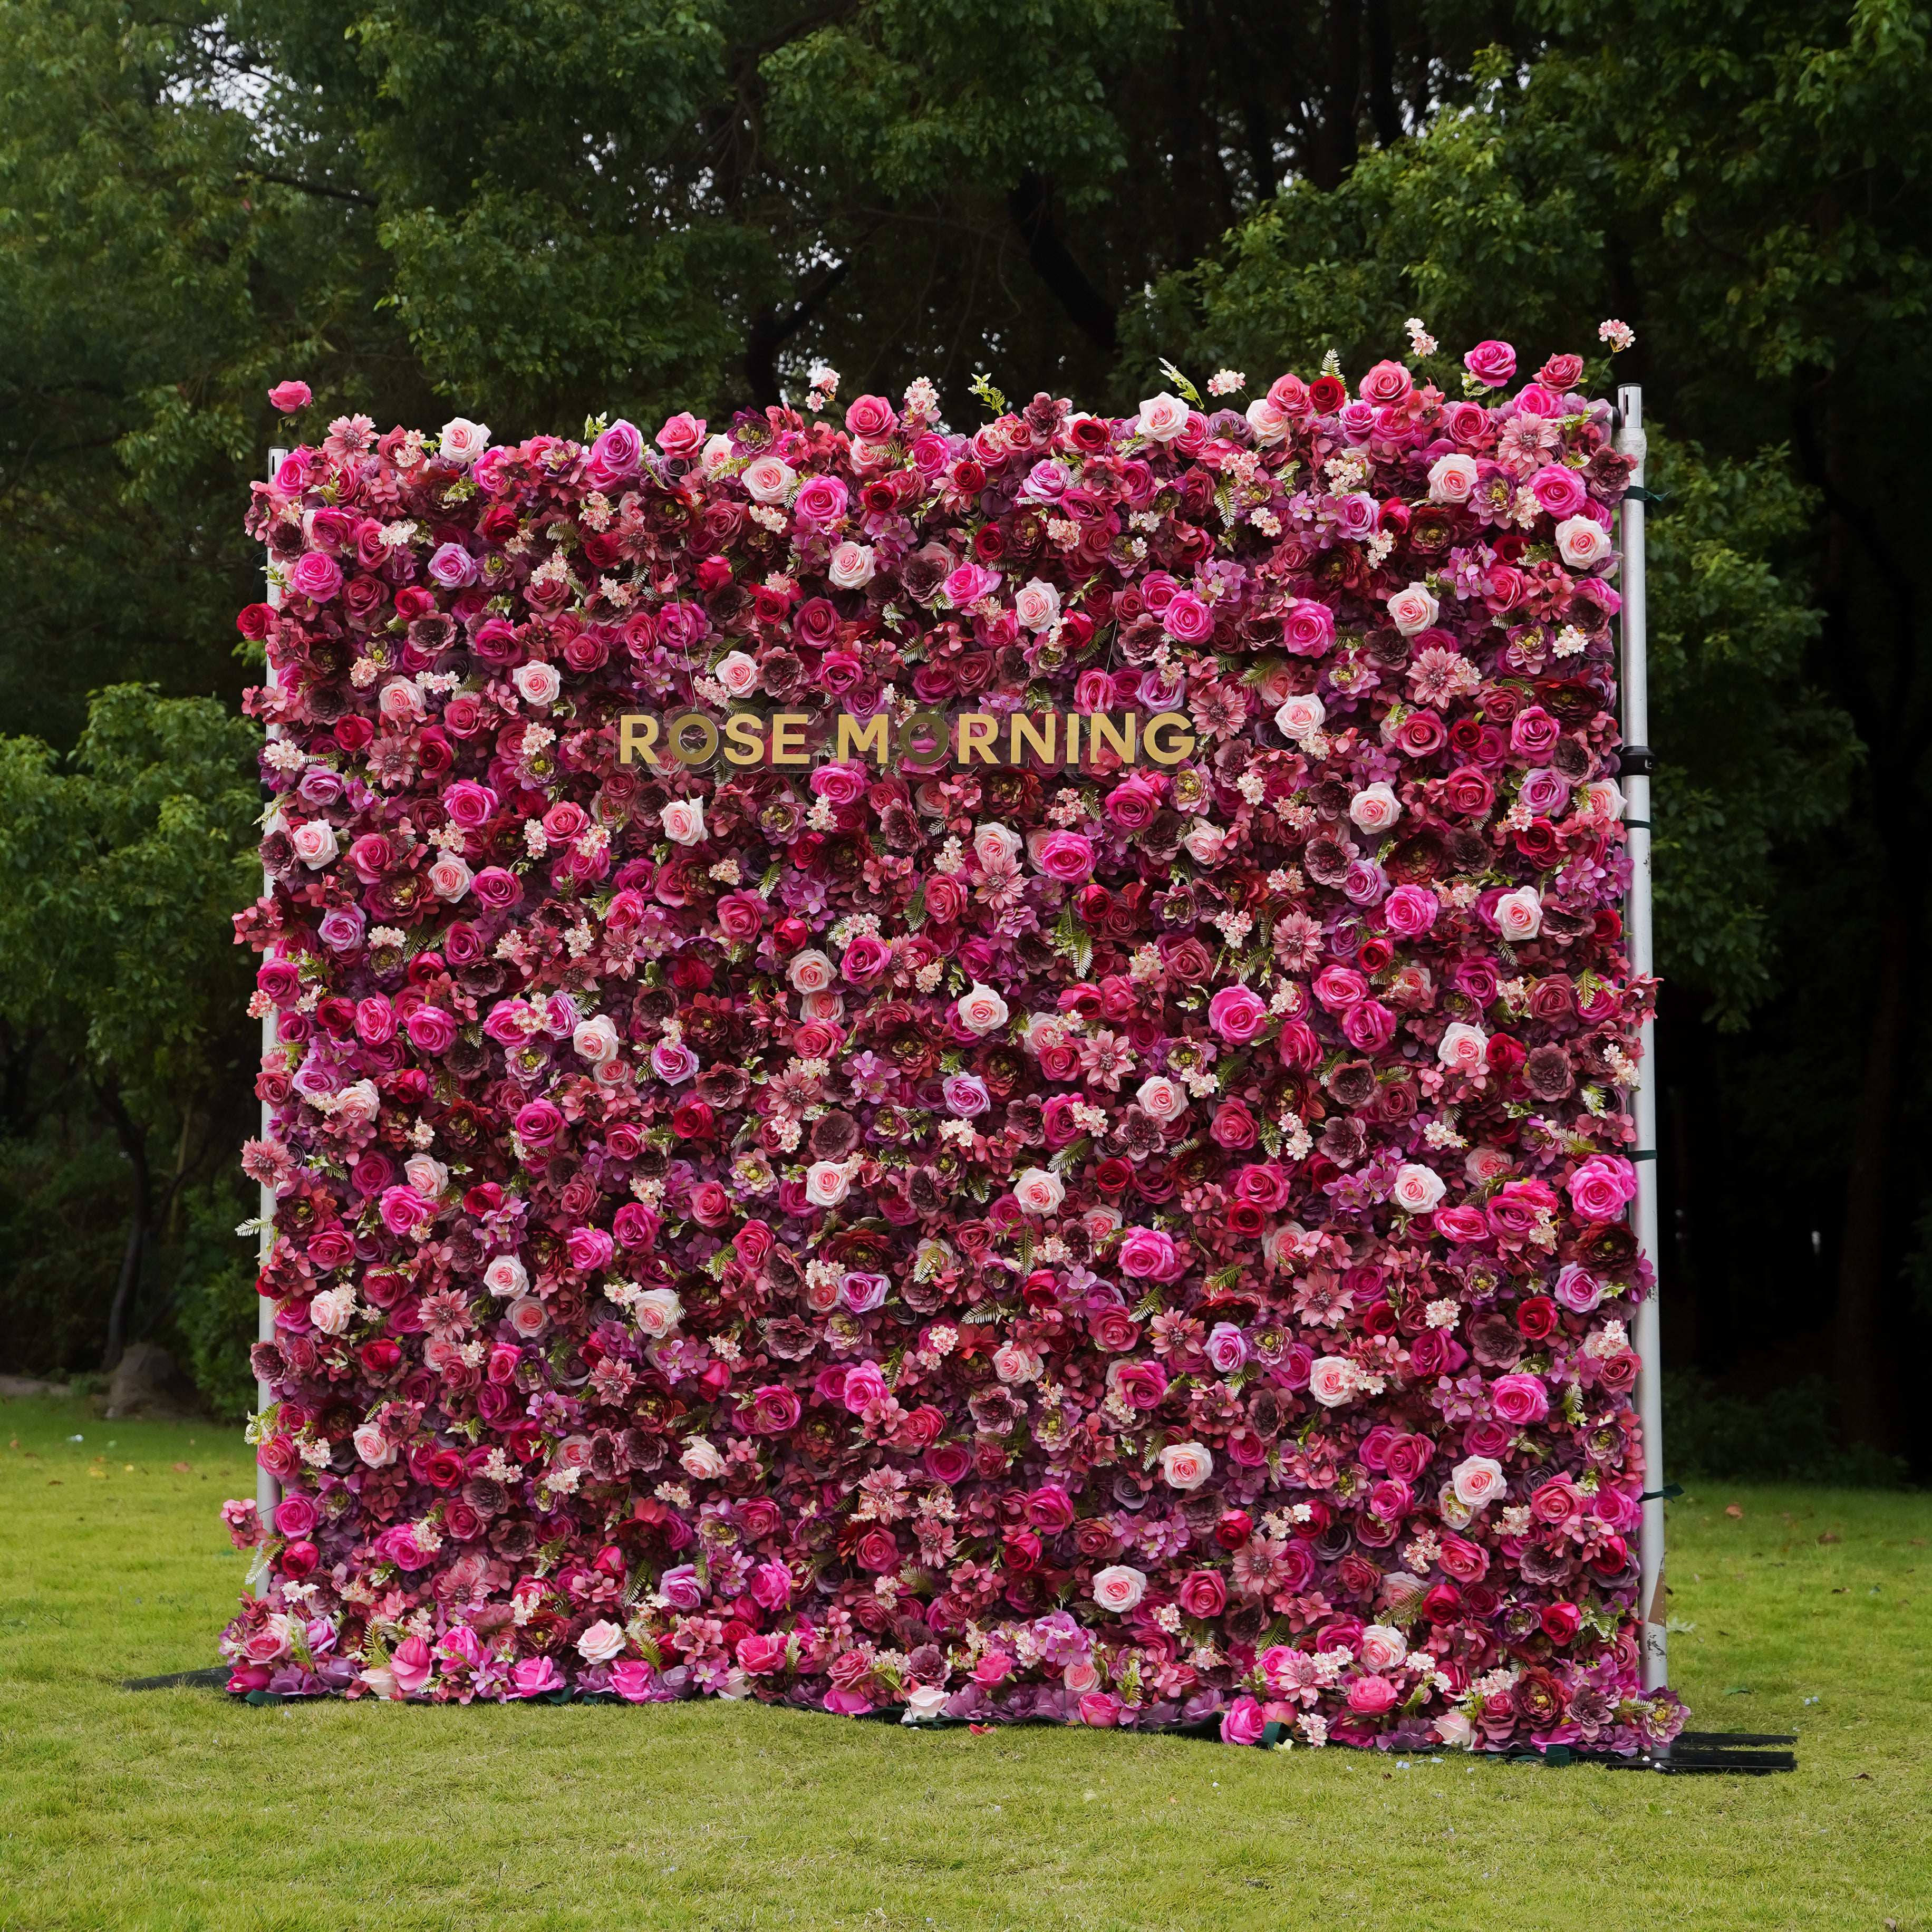 Blossom 3D Fabric Artificial Flower Wall Rolling Up Curtain Flower Wall Rose Morning